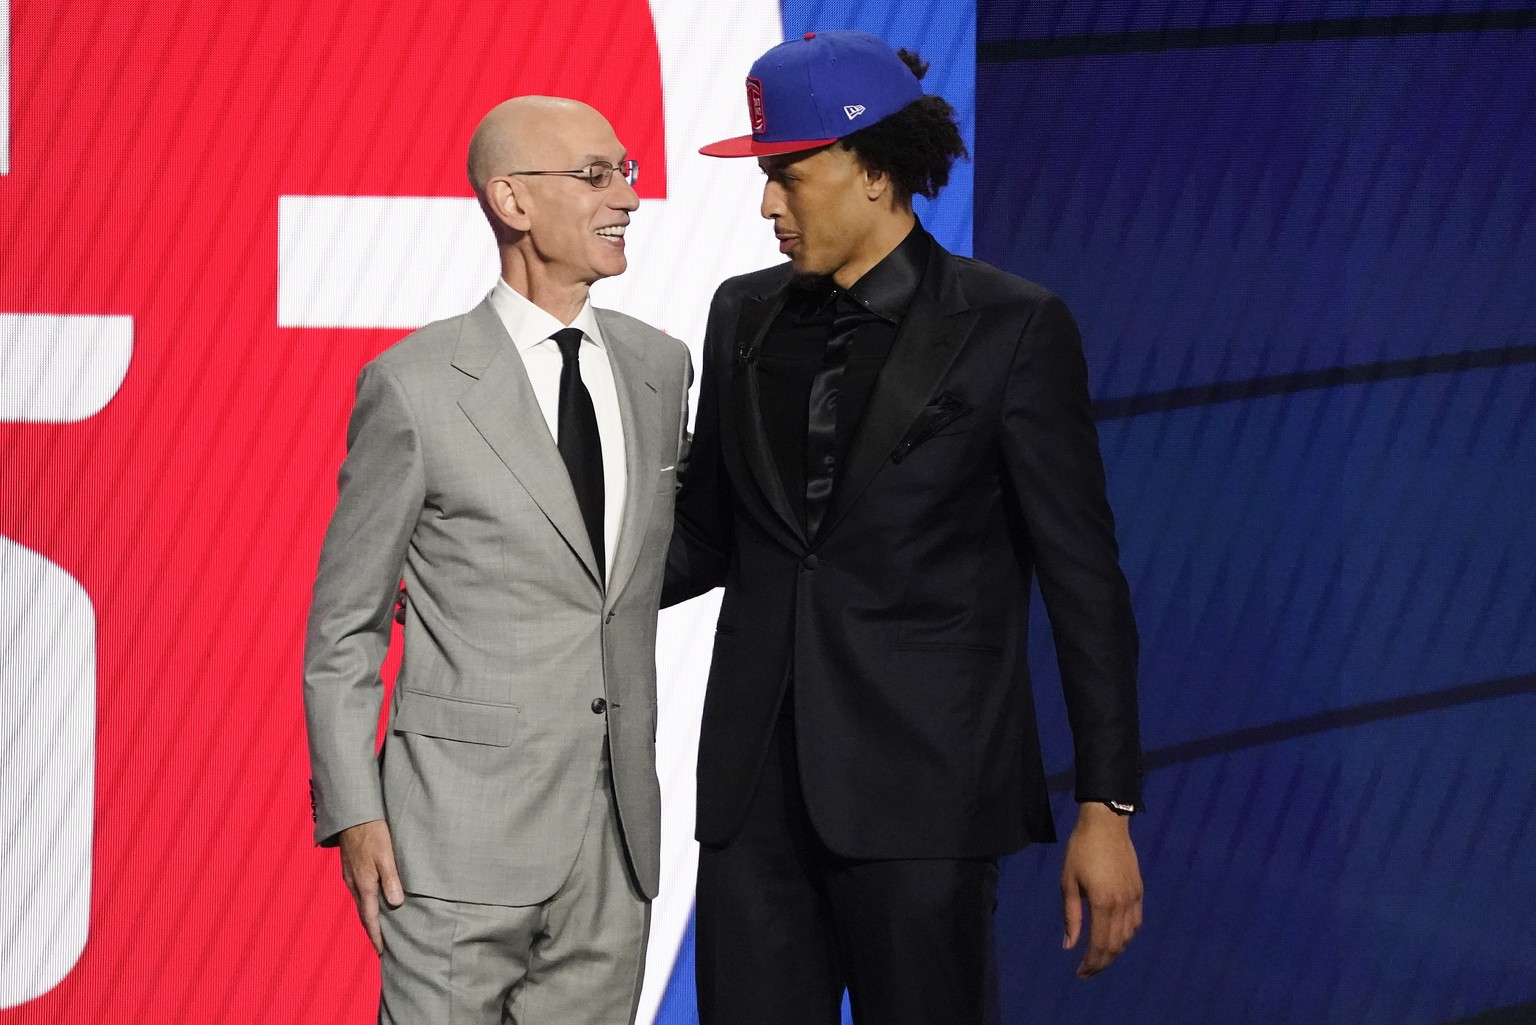 NBA Commissioner Adam Silver greets Cade Cunningham who was picked as the number one overall pick by the Detroit Pistons during the NBA basketball draft, Thursday, July 29, 2021, in New York. (AP Phot ...